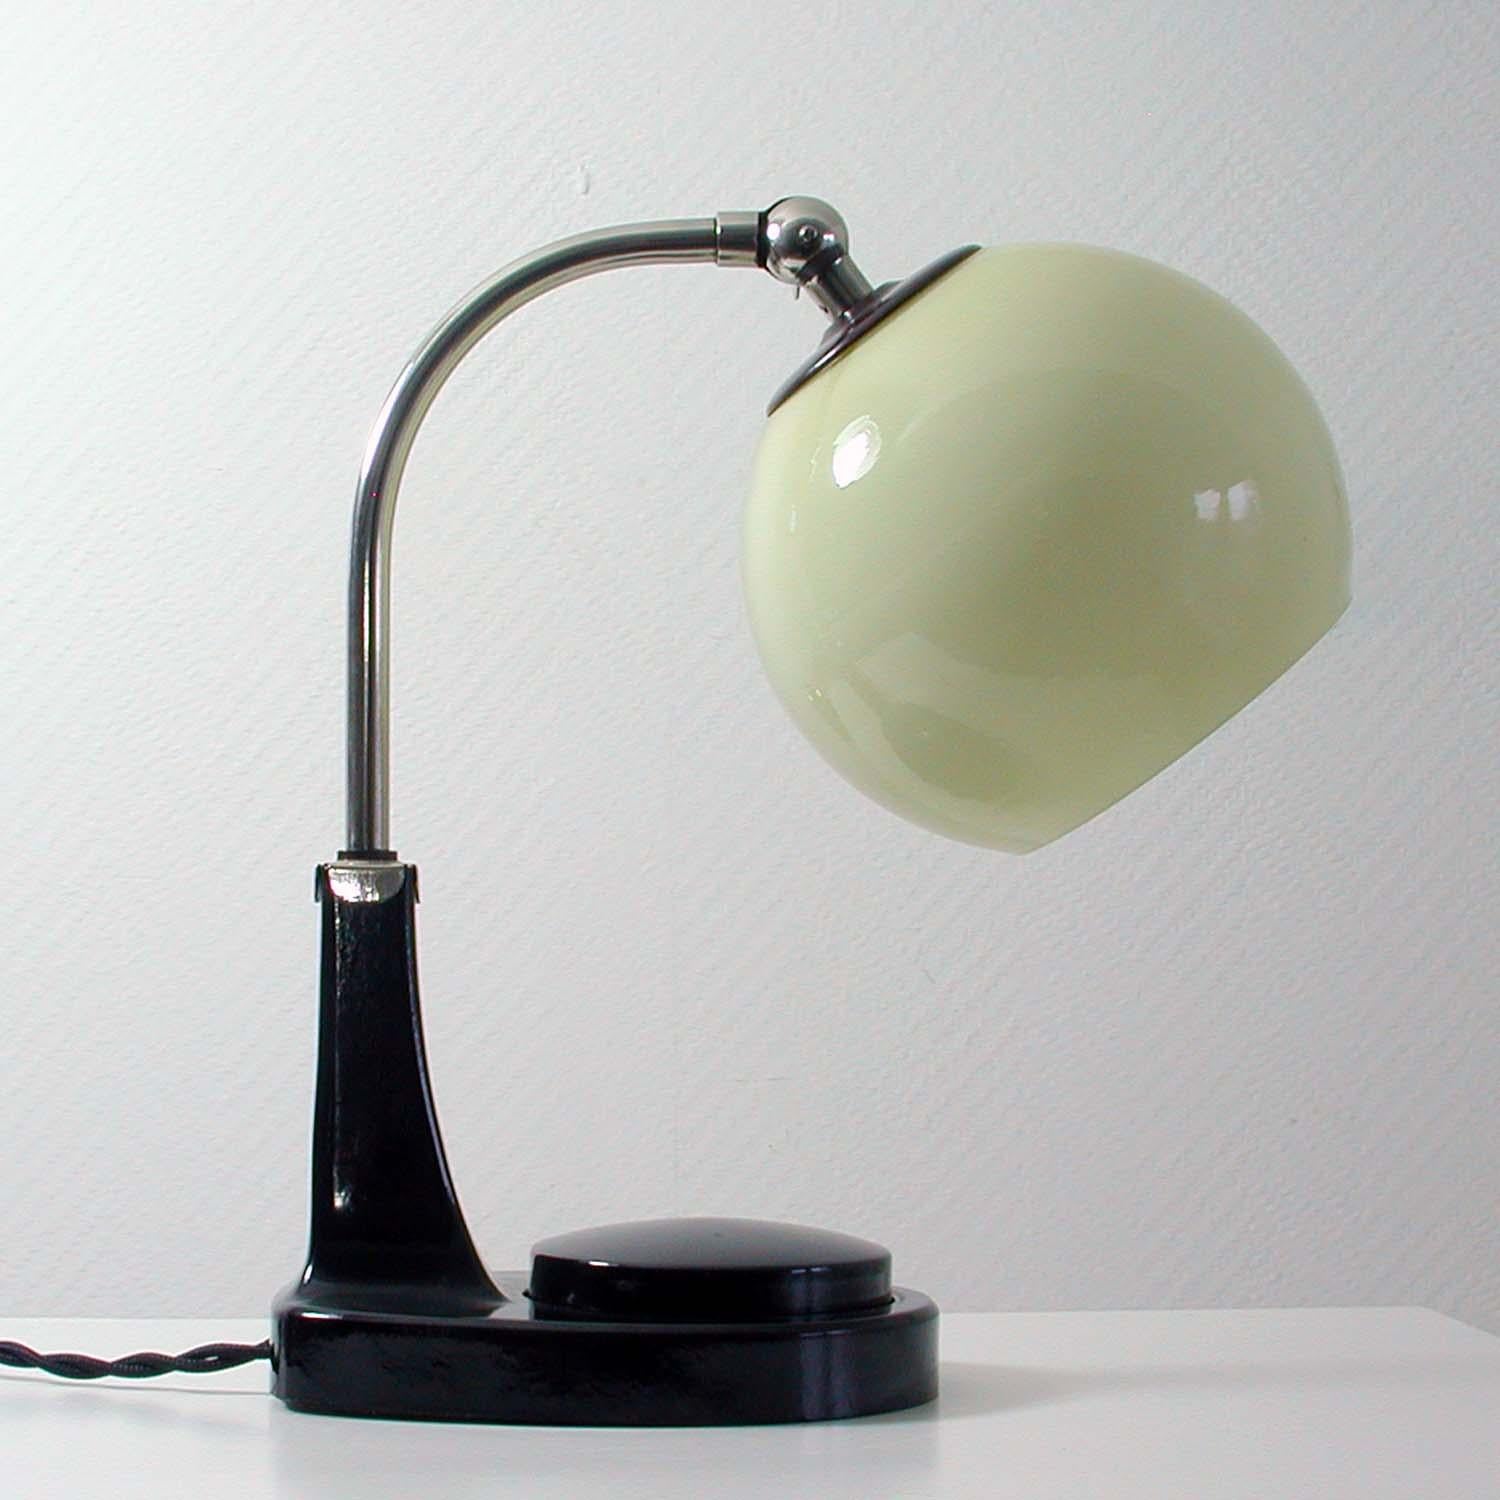 This vintage table light was designed by Marianne Brandt and manufactured in Germany in the 1930s during the Bauhaus period. It has got a bakelite base, a chrome lamp arm and an adjustable lamp shade in cream opaline glass.

The lamp that can be